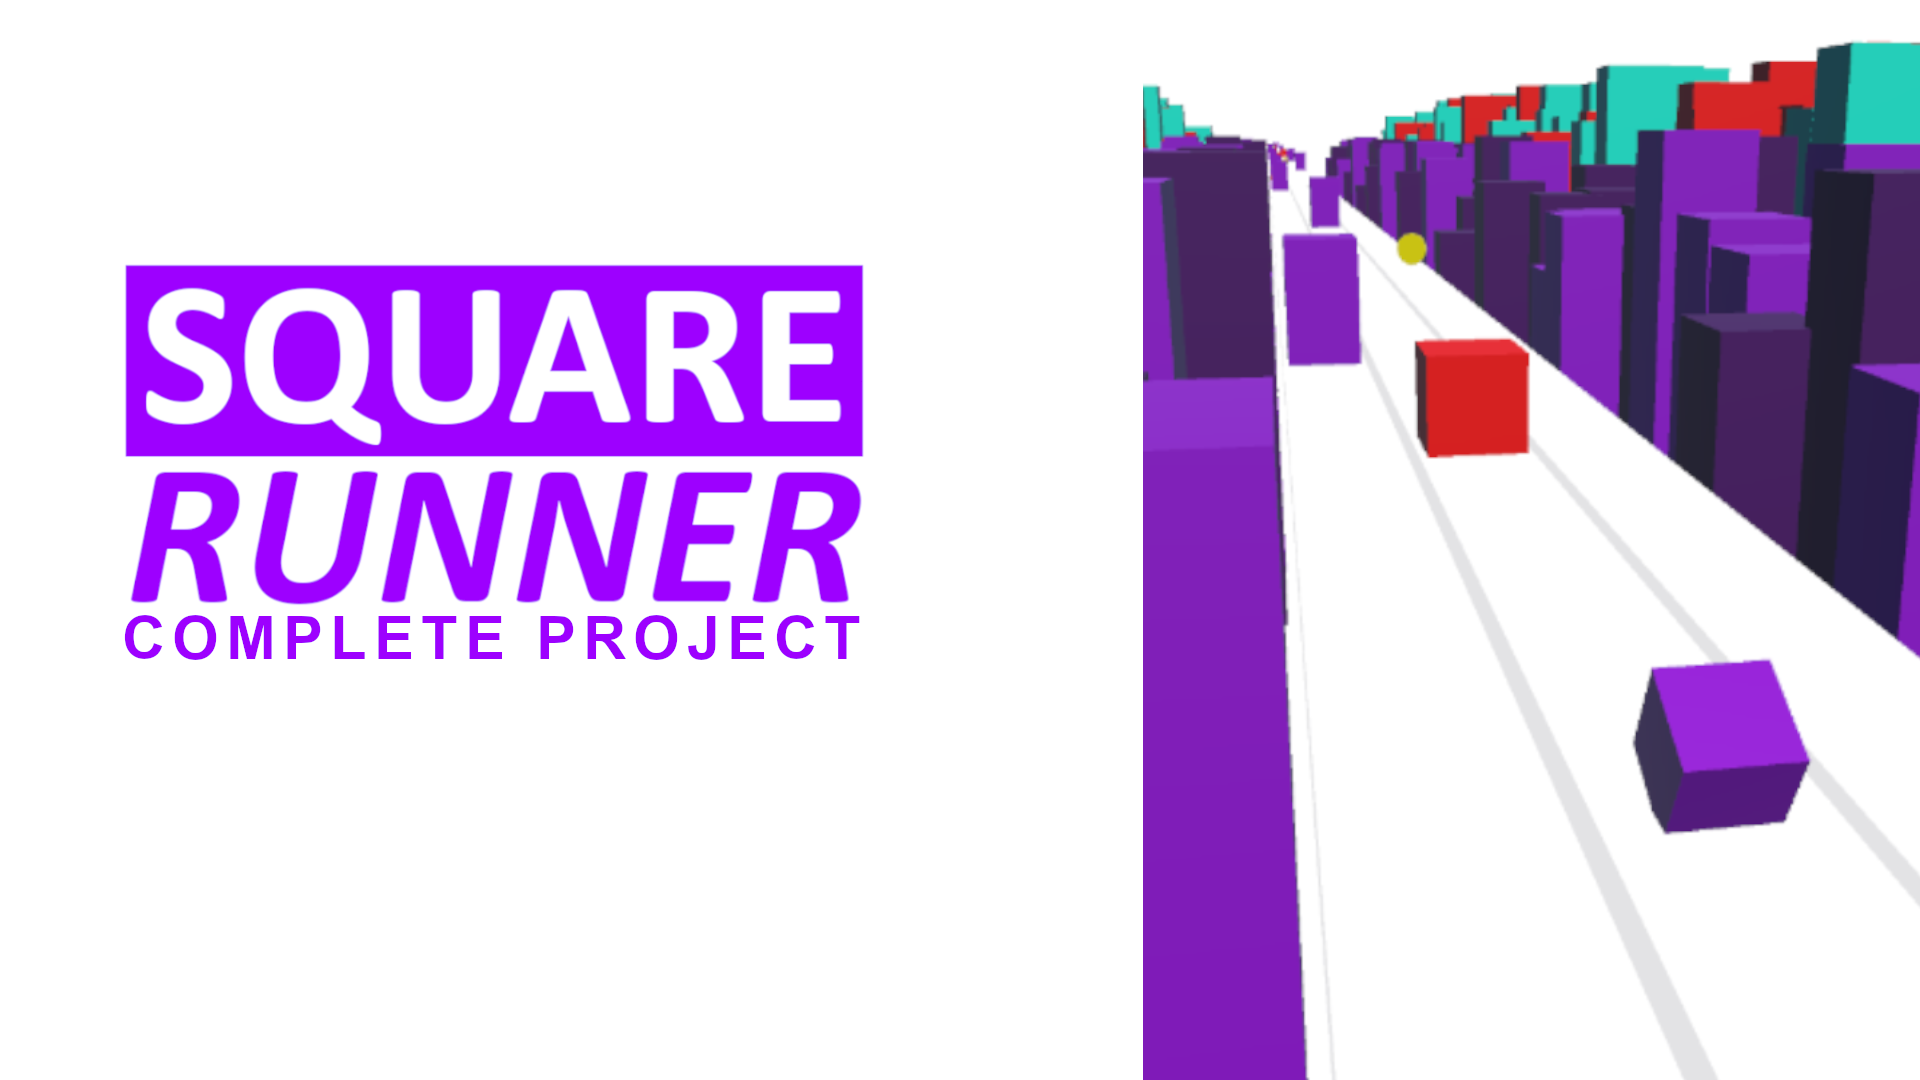 Square Runner: Complete Project